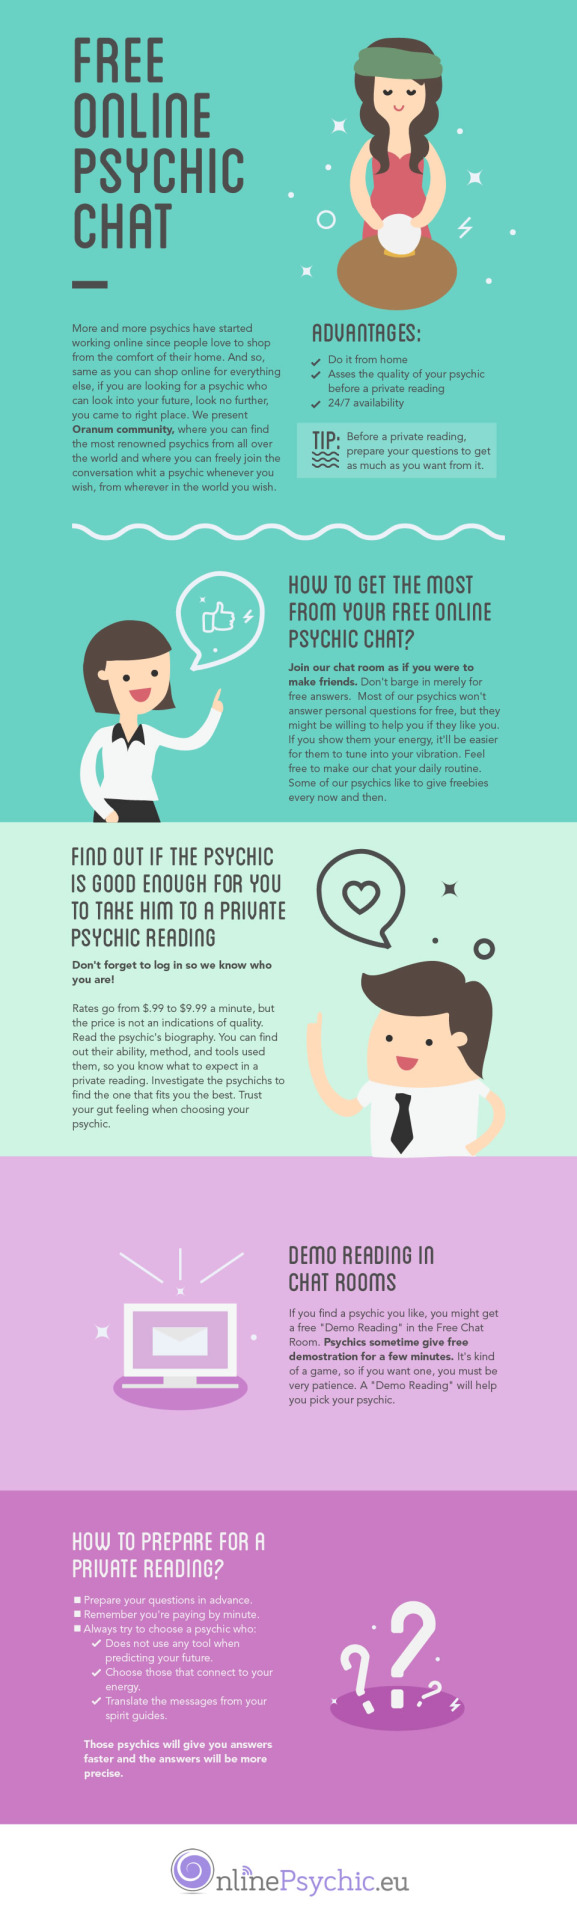 Free Online Psychic Chat [INFOGRAPHIC]